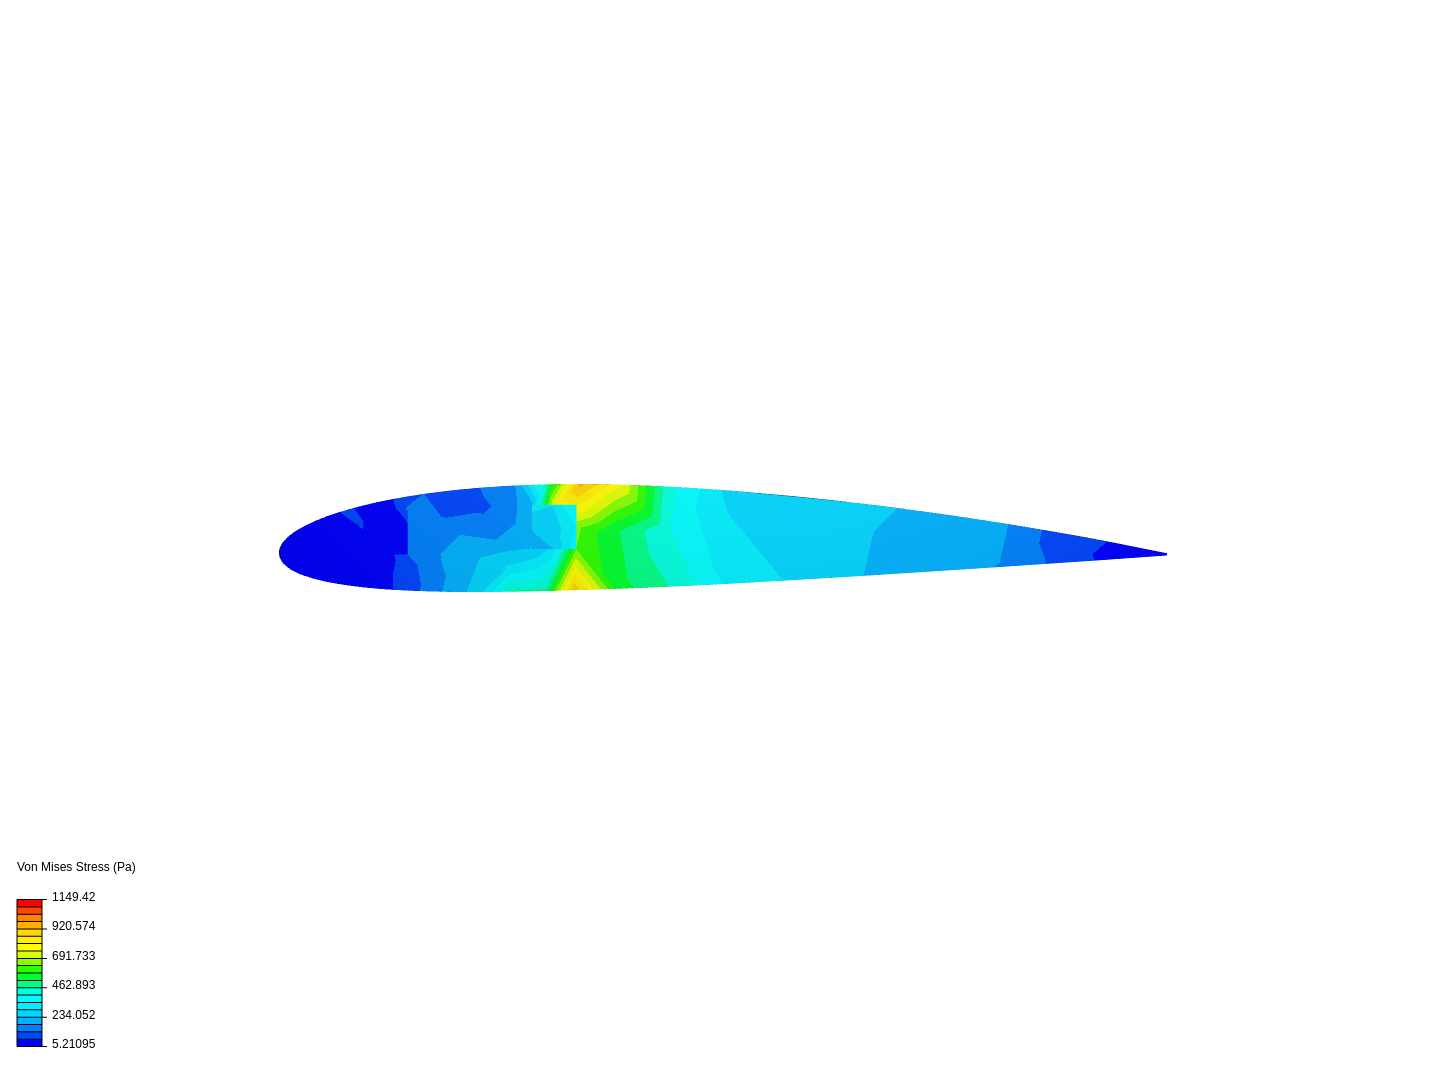 Airfoil 2 image